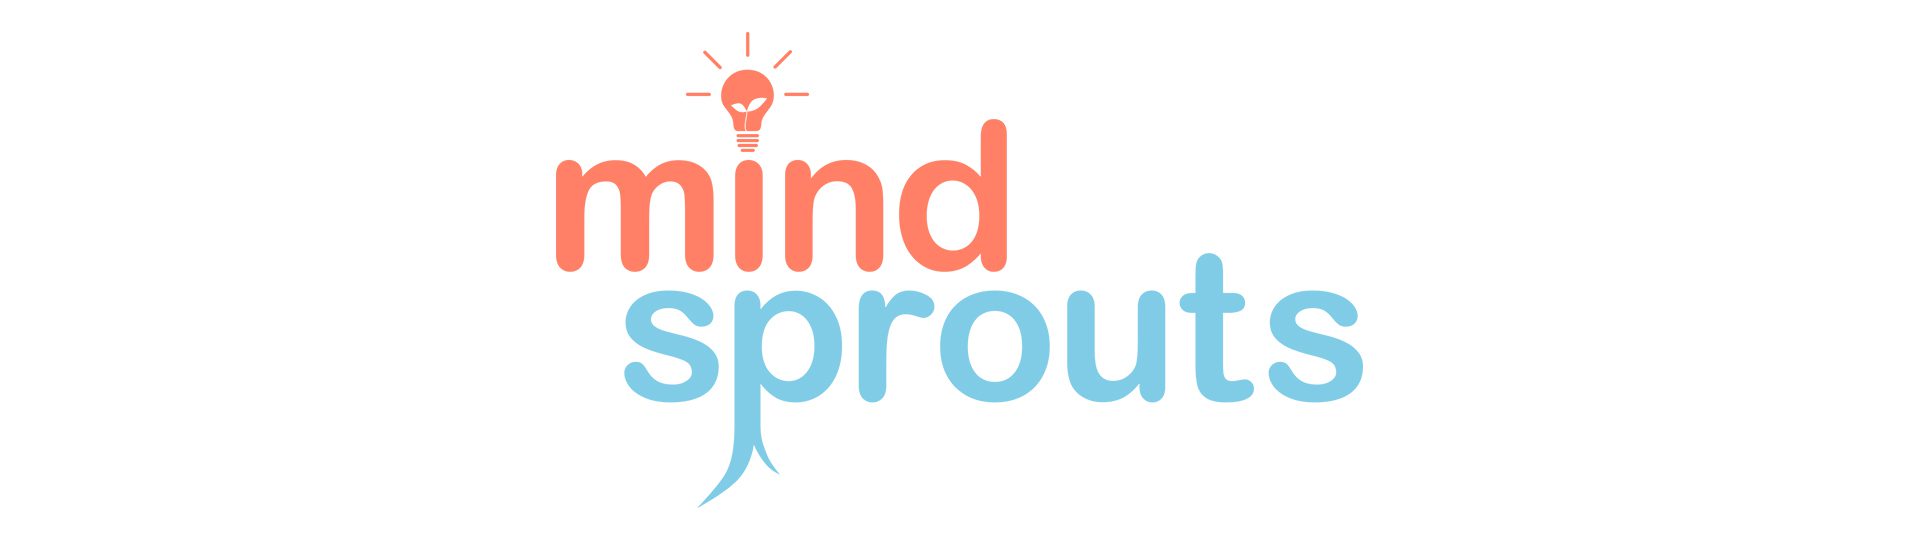 MindSprouts